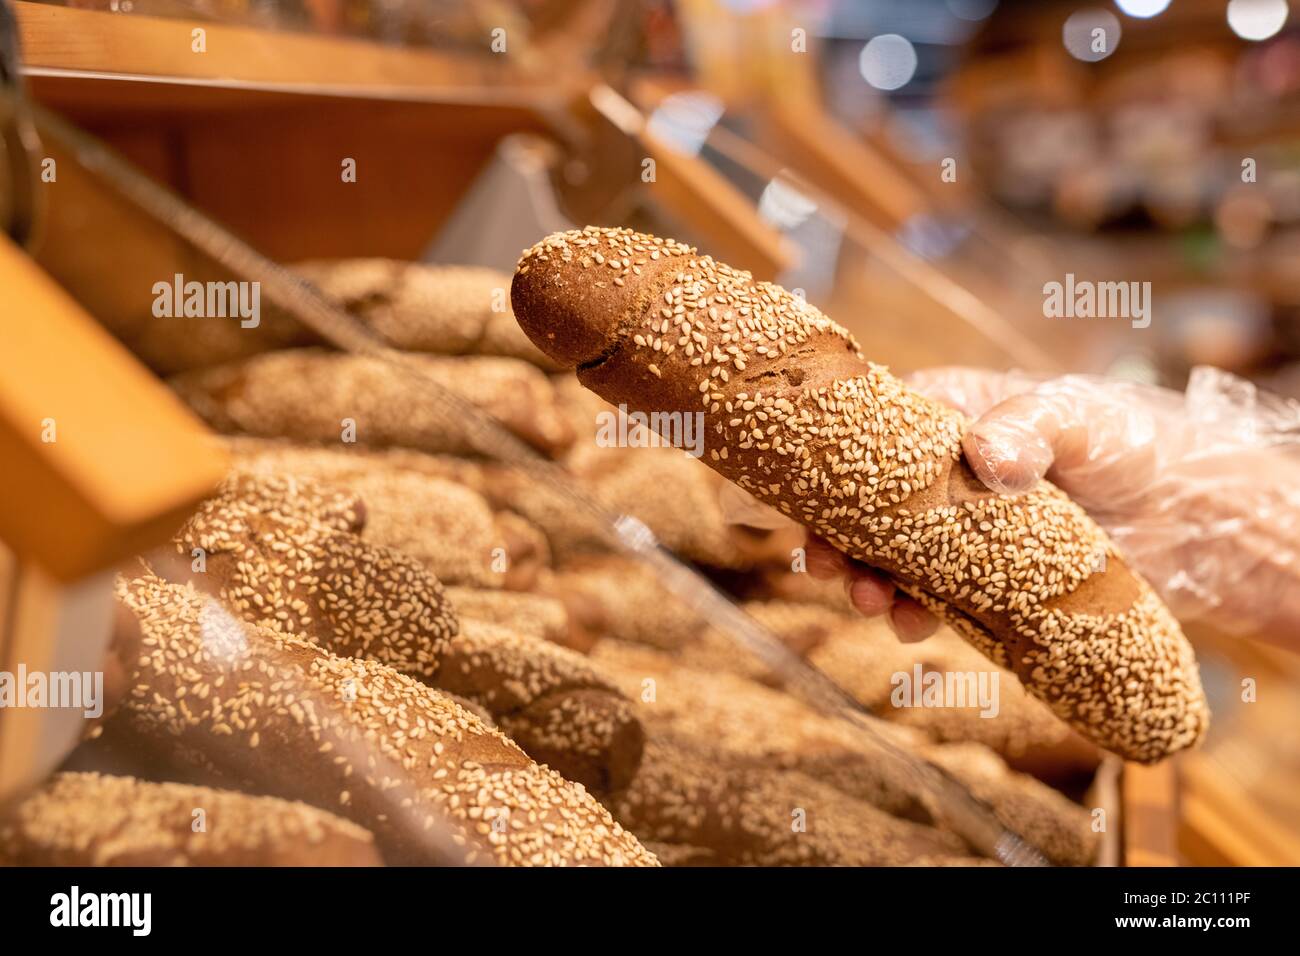 Gloved hand of mature female buyer holding fresh bread sprinkled with sesame seeds while standing by display in supermarket Stock Photo